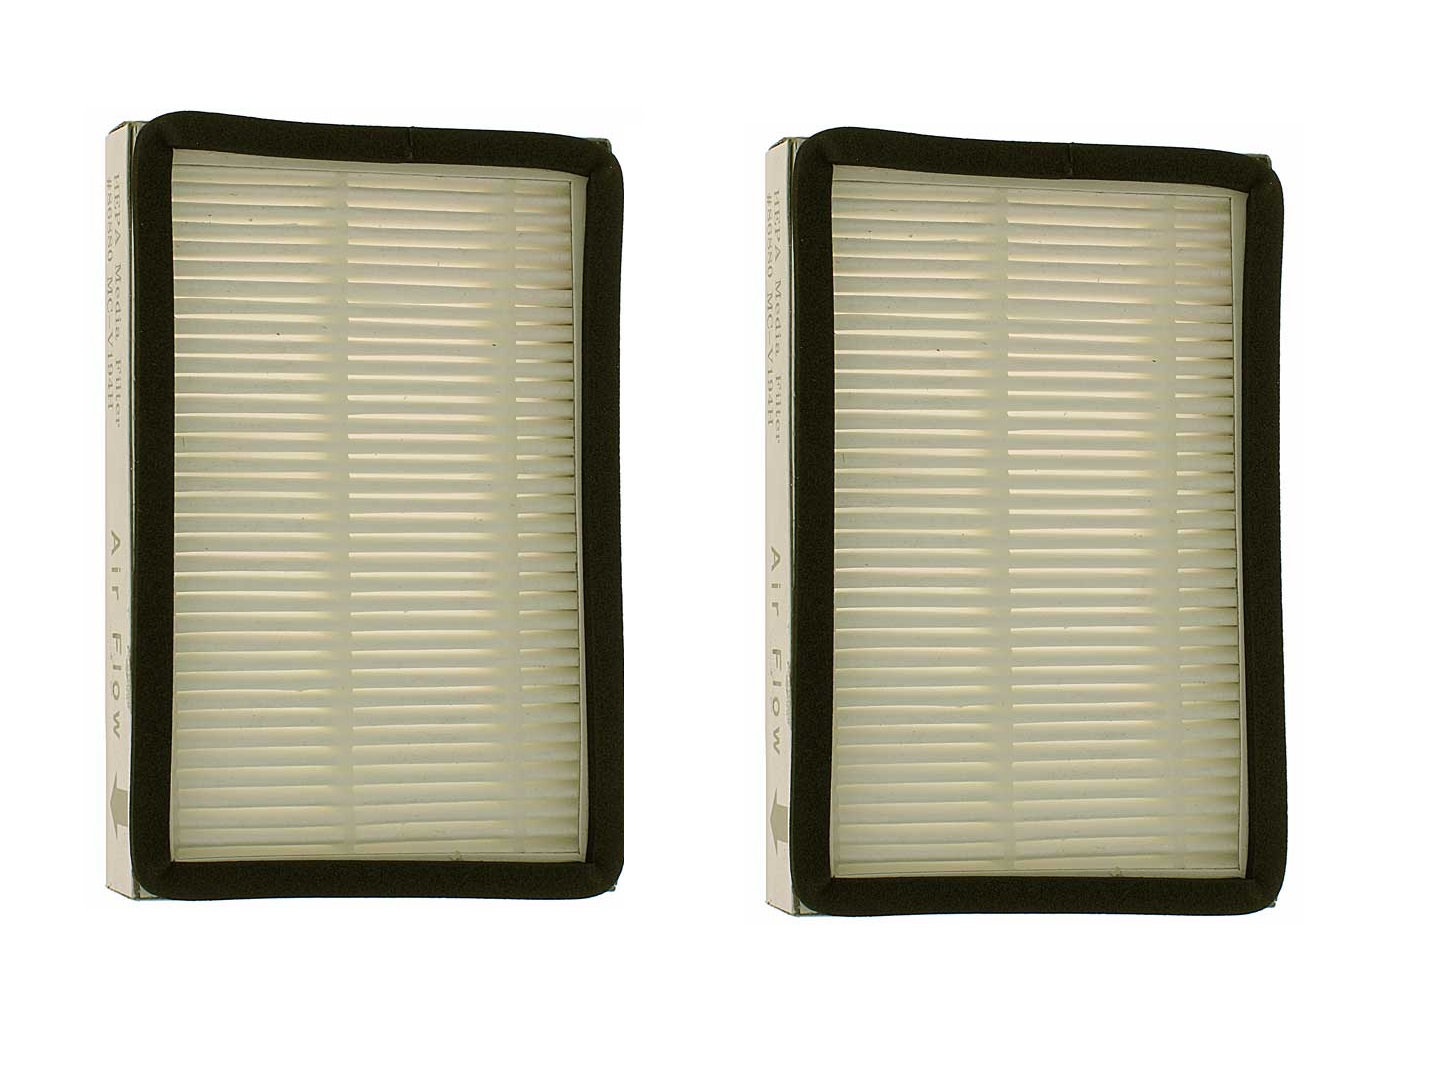 HOME CARE 2 For Ken EF1 Filters For Upright & Canisters HEPA Filter 86889, 53295 2 pk